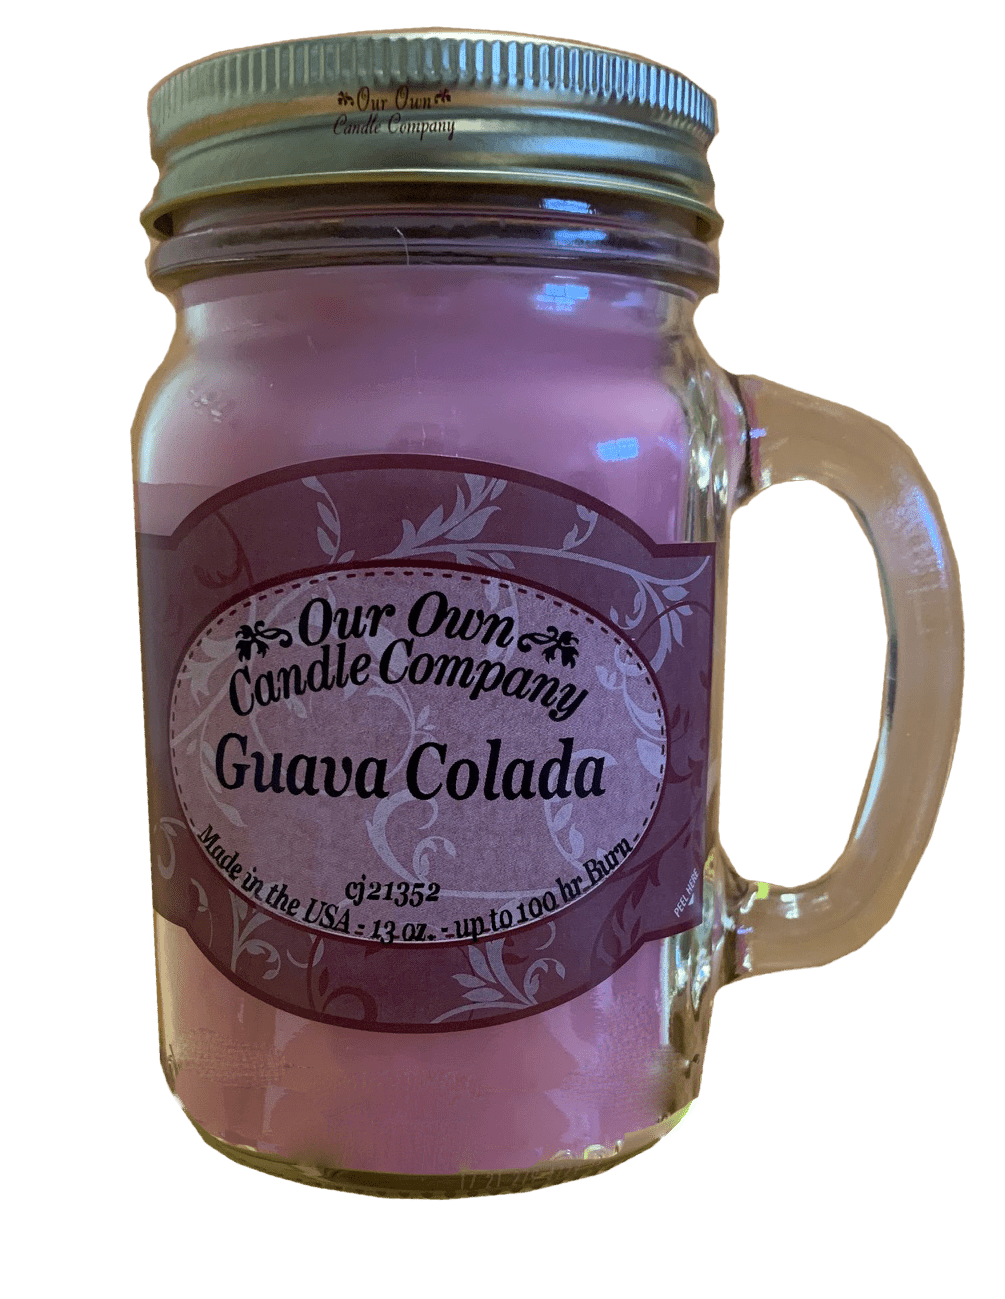 Our Own Candle Company 13 oz Mason Jar Candle - Guava Colada - Equine Exchange Tack Shop